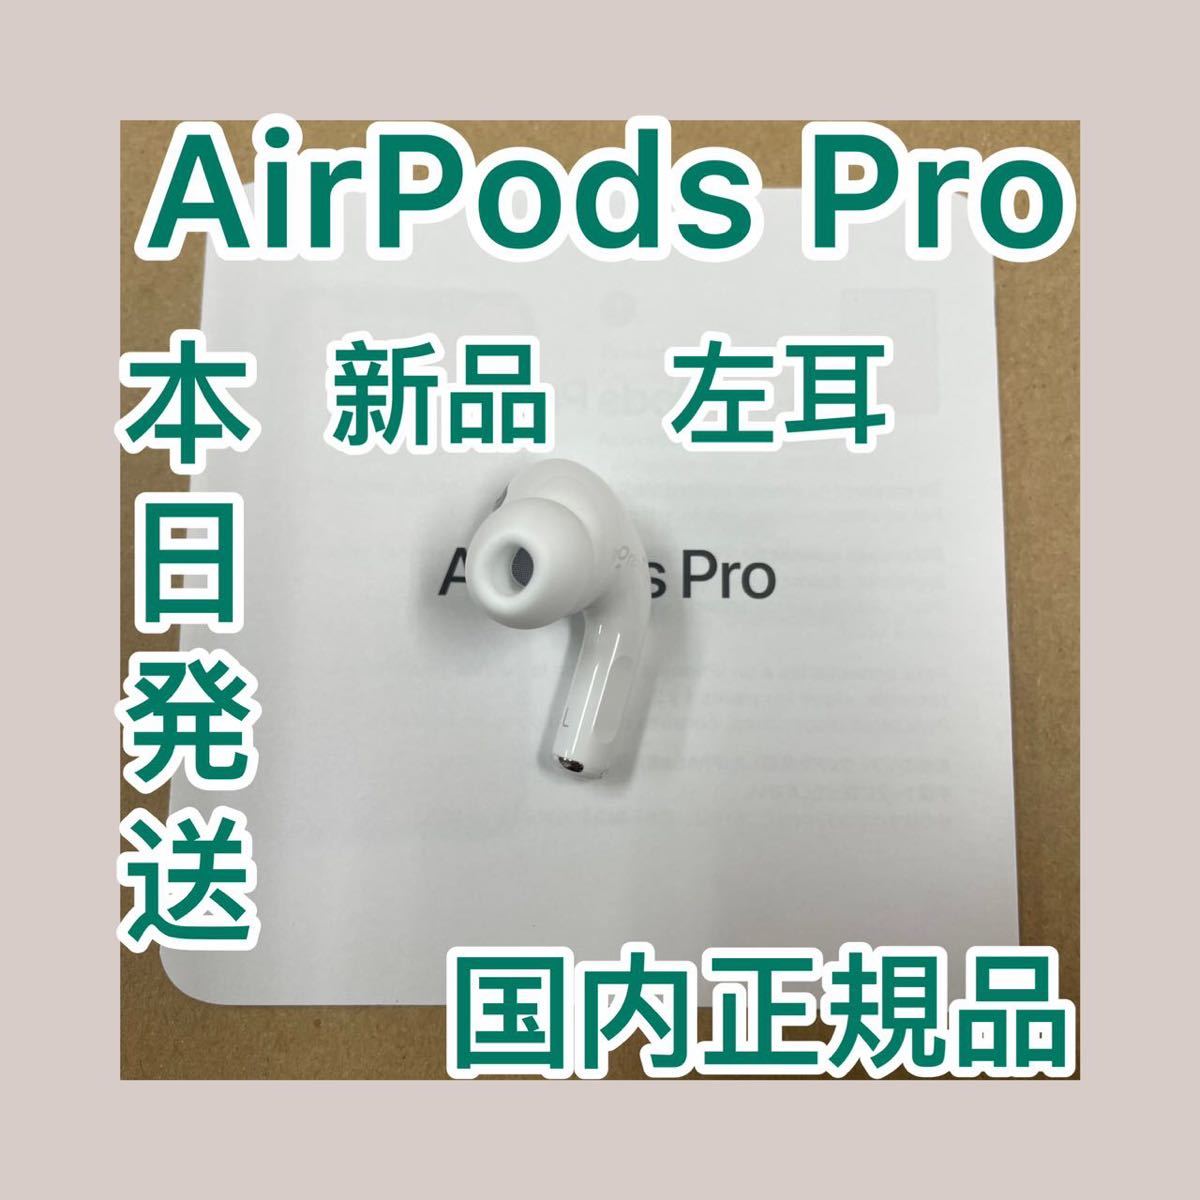 PayPayフリマ｜AirPods Pro 国内正規品 エアーポッズ 左耳のみ